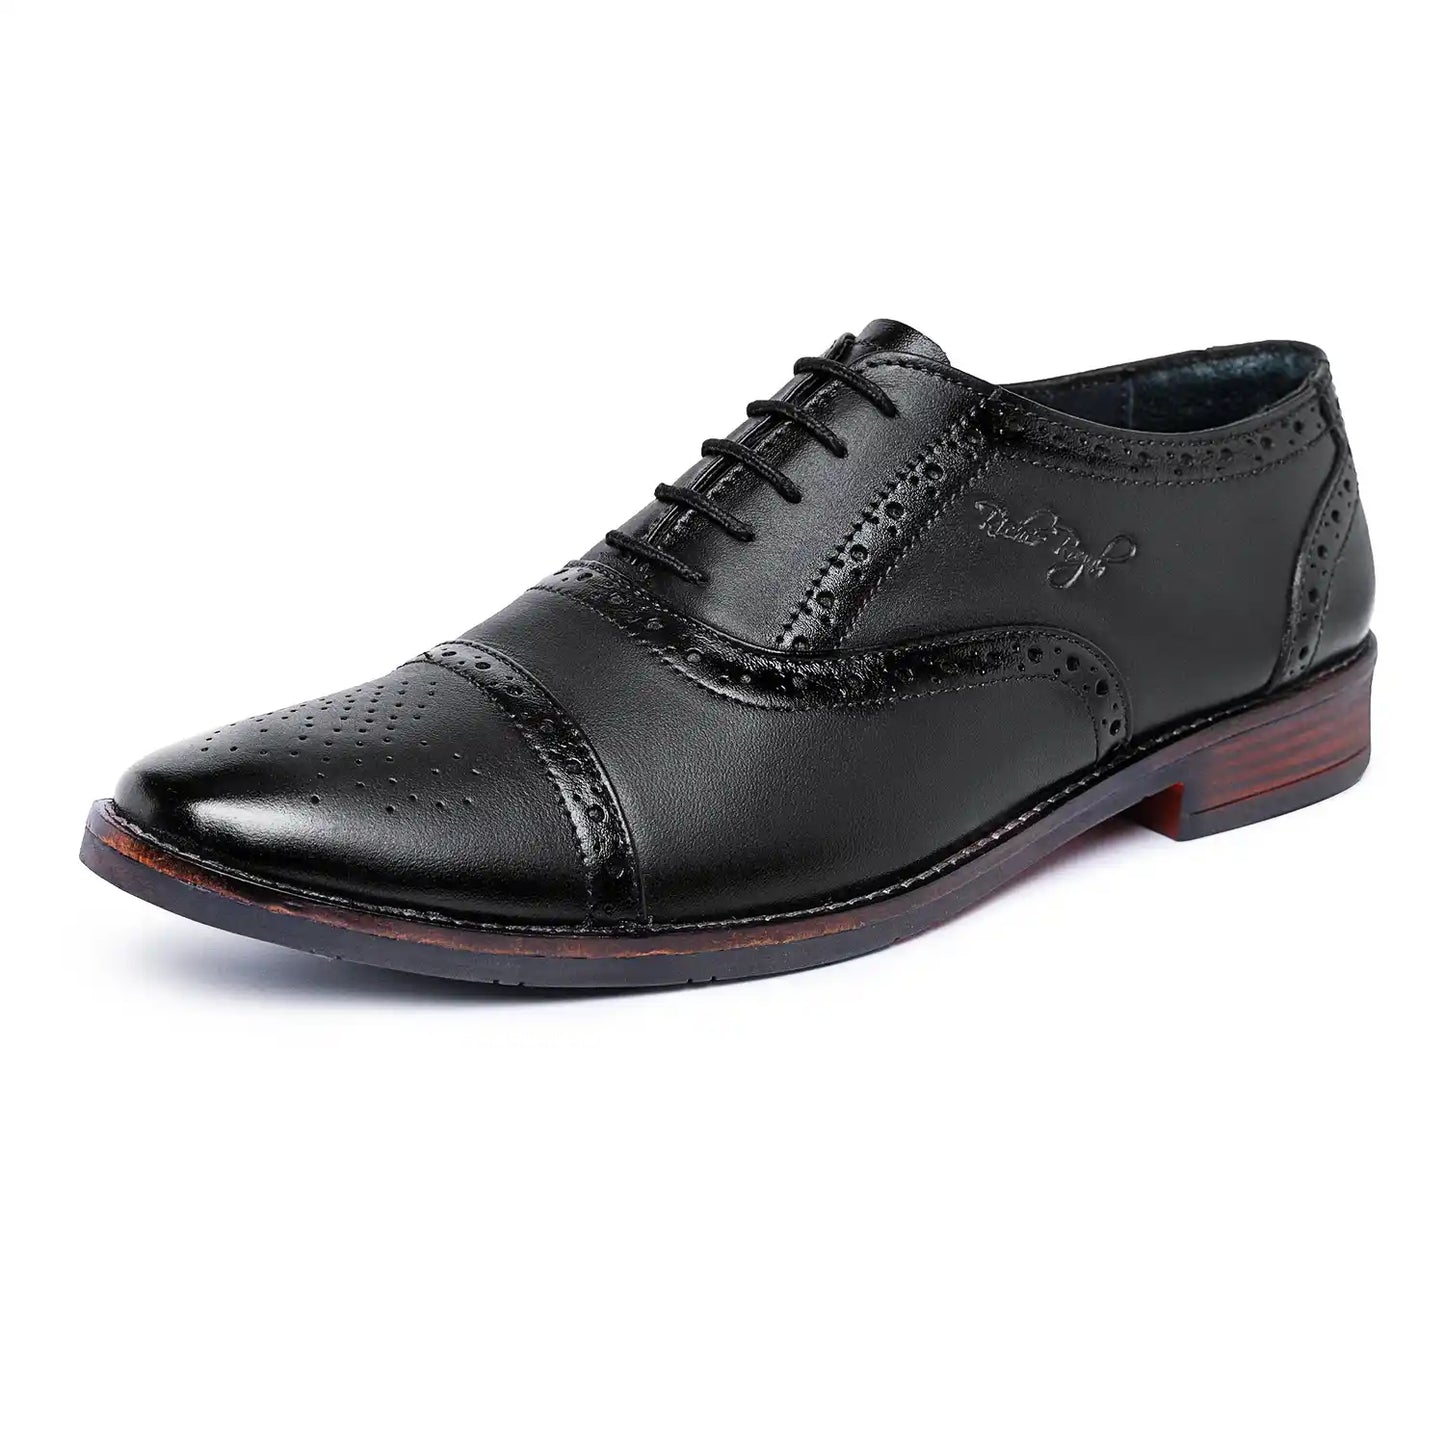 Oxford Brogues Pure Leather Shoes for Men